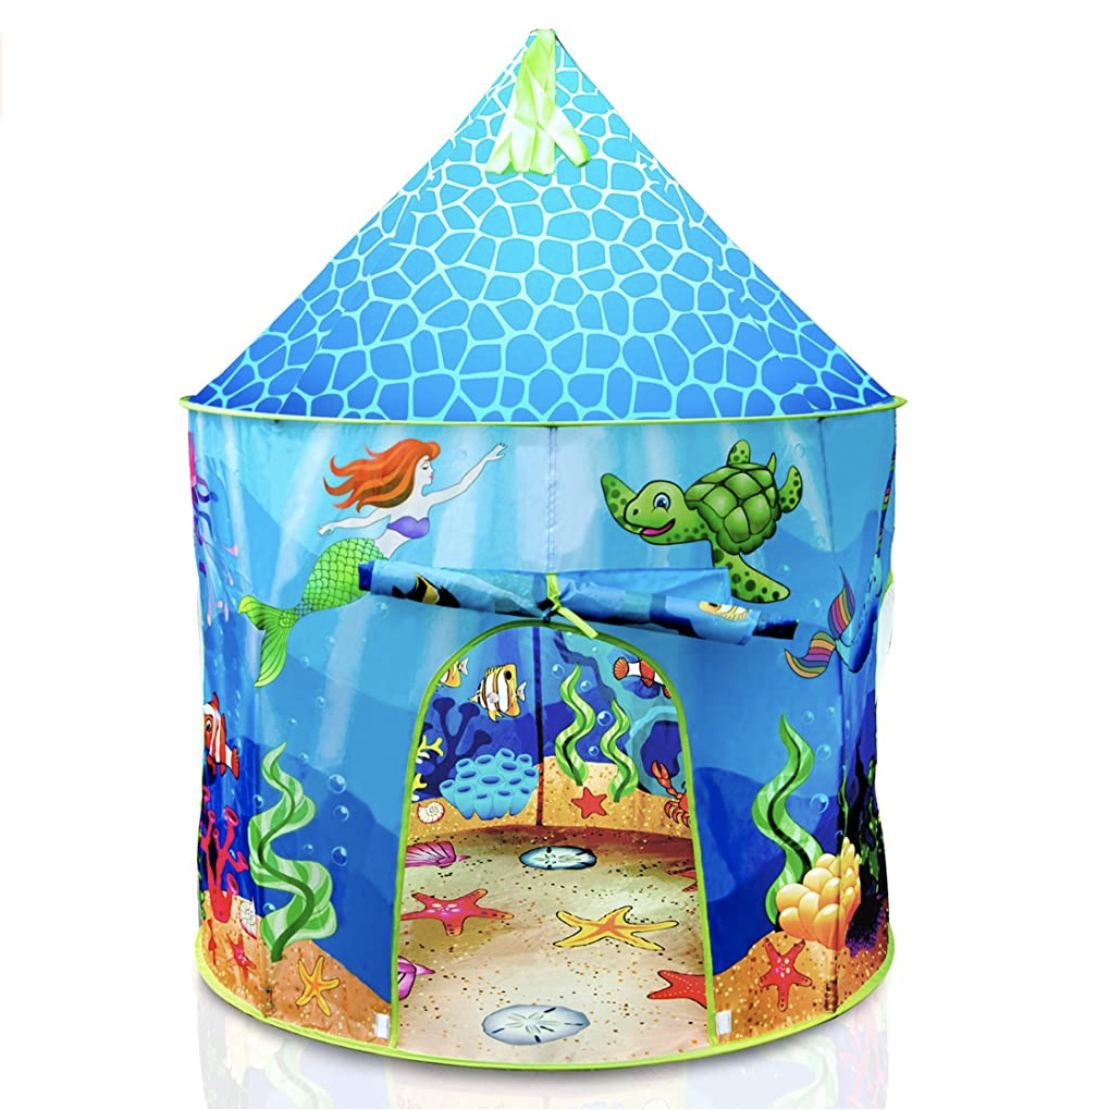 Amazon.com: USA Toyz Under The Sea Kids Tent - Mermaid Pop Up Kids Play Tent, Indoor and Outdoor Pla